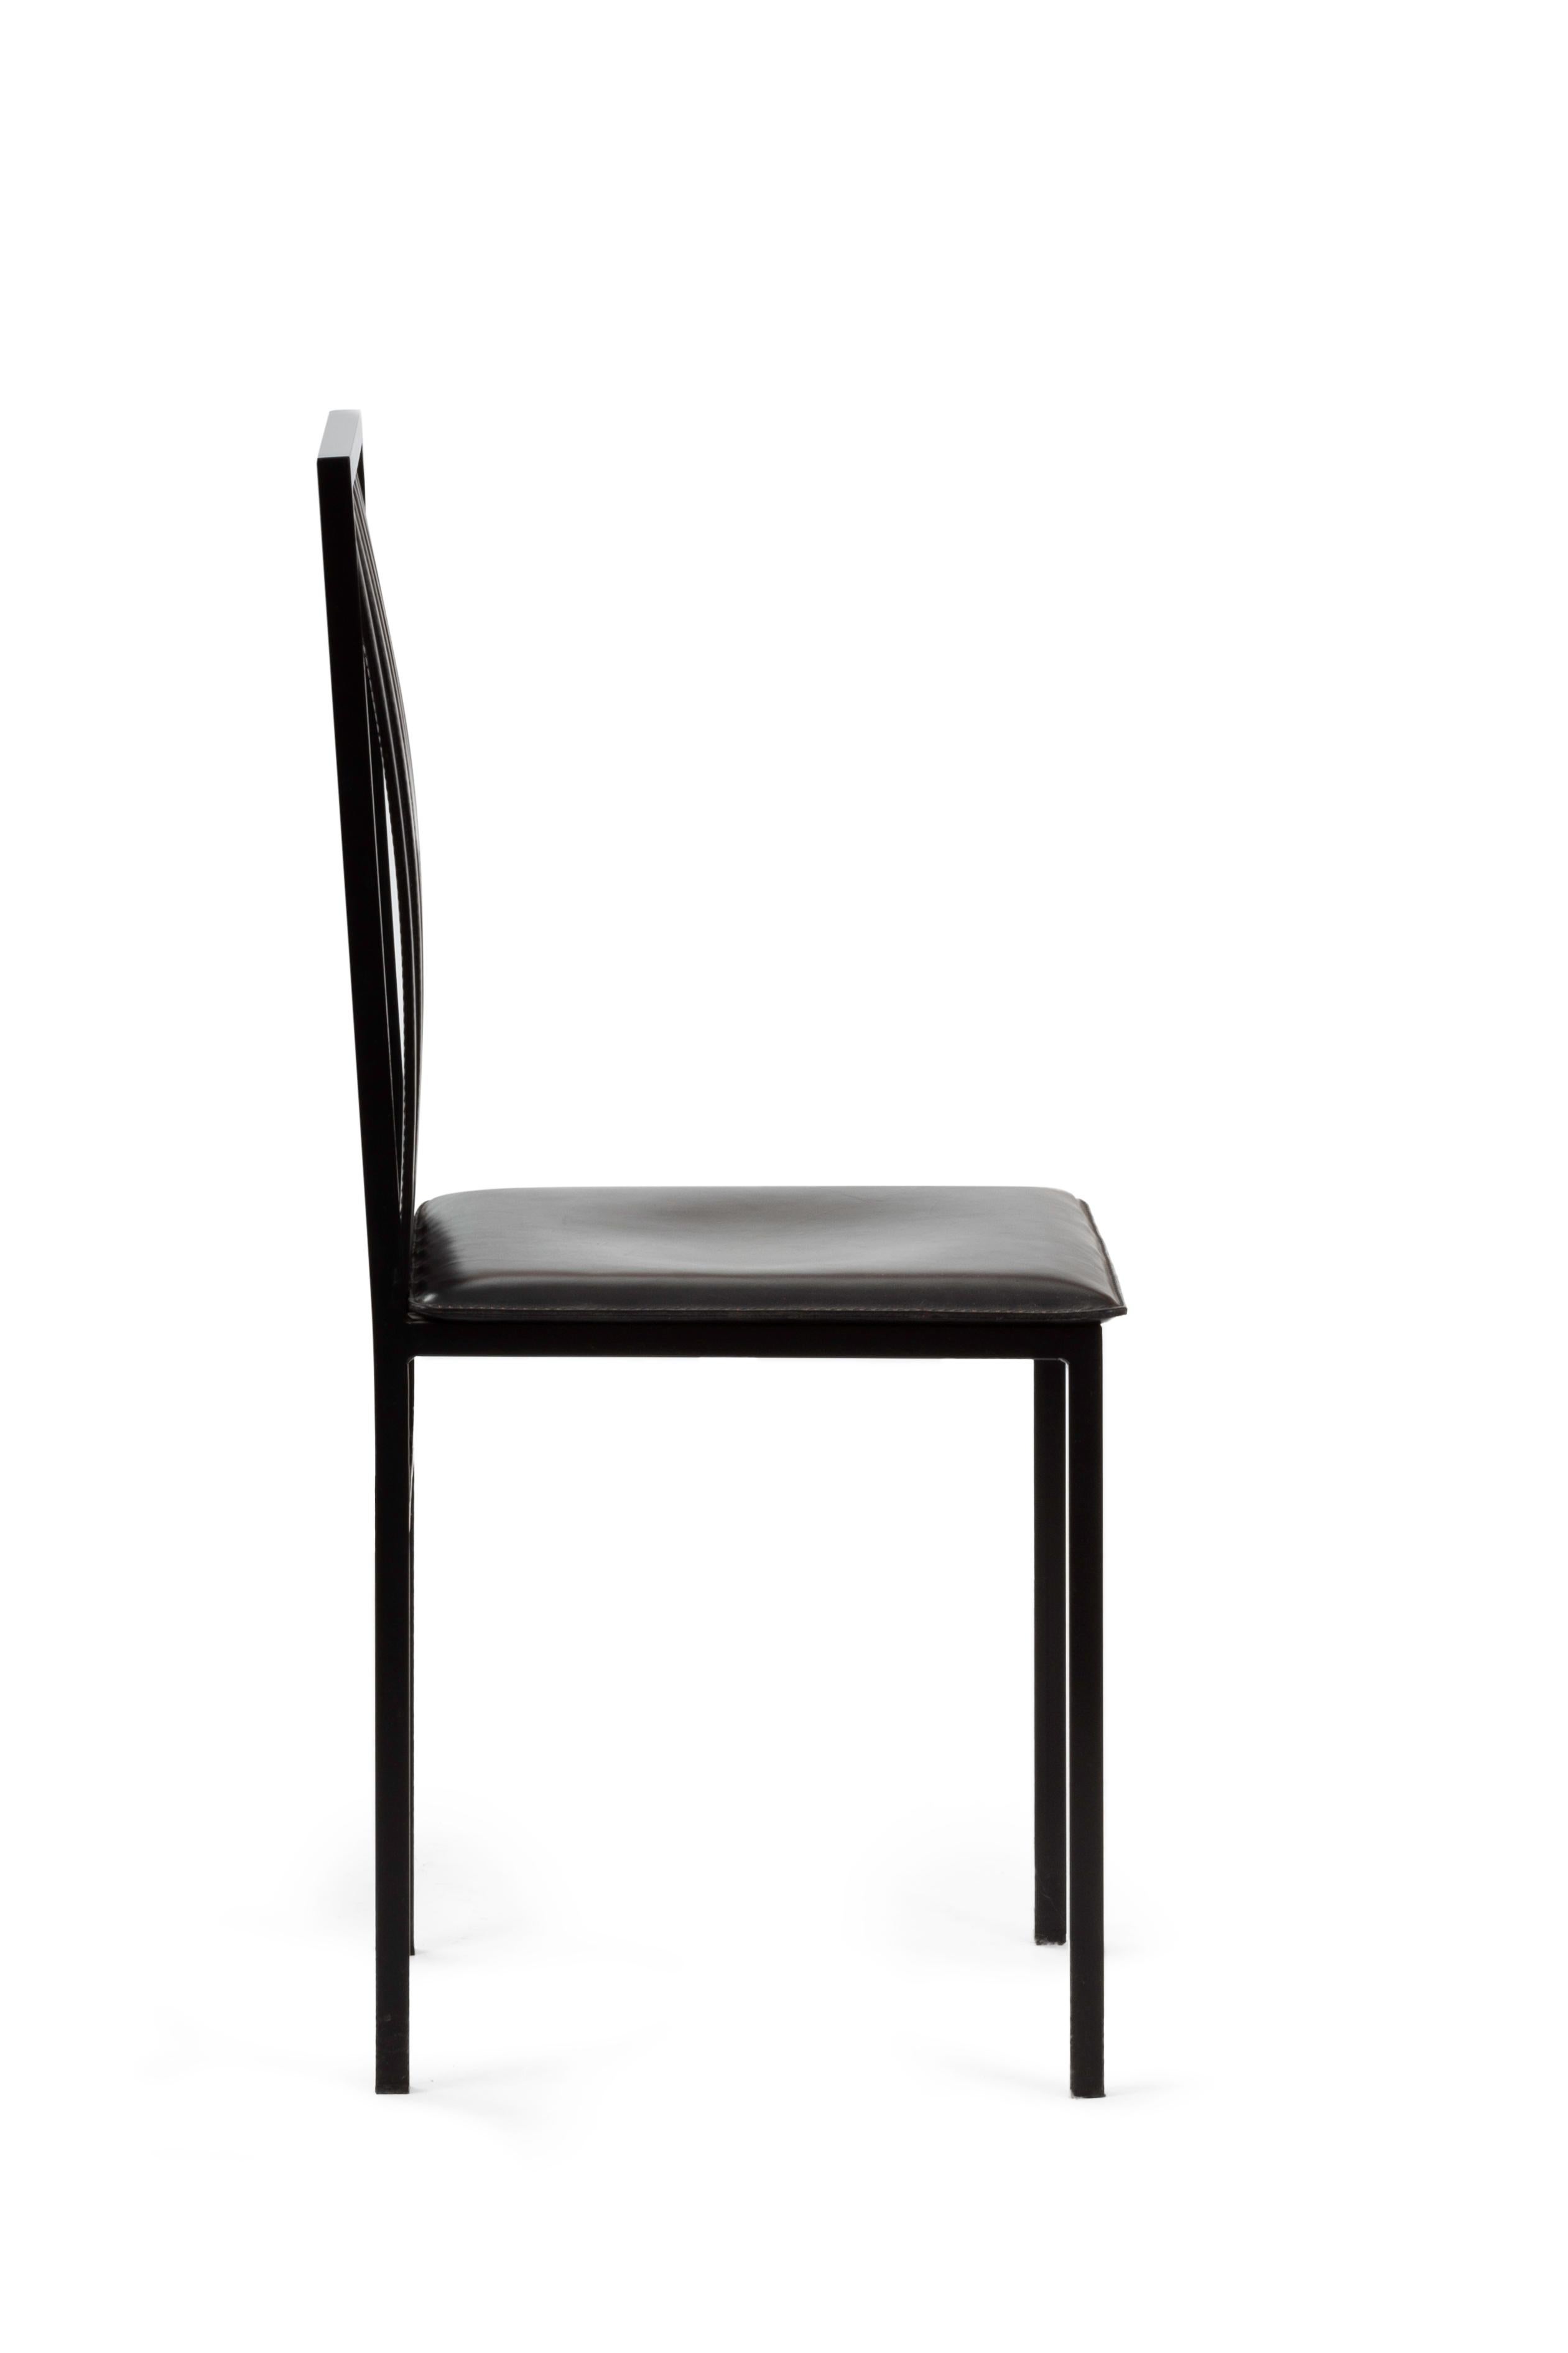 Painted metal and leather chair inspired by the elegant tailcoats of the 1940s. 
The slender black painted iron frame is characterised by a seductive spring steel back with convex vertical bars, upholstered in fine black leather. Seat upholstered